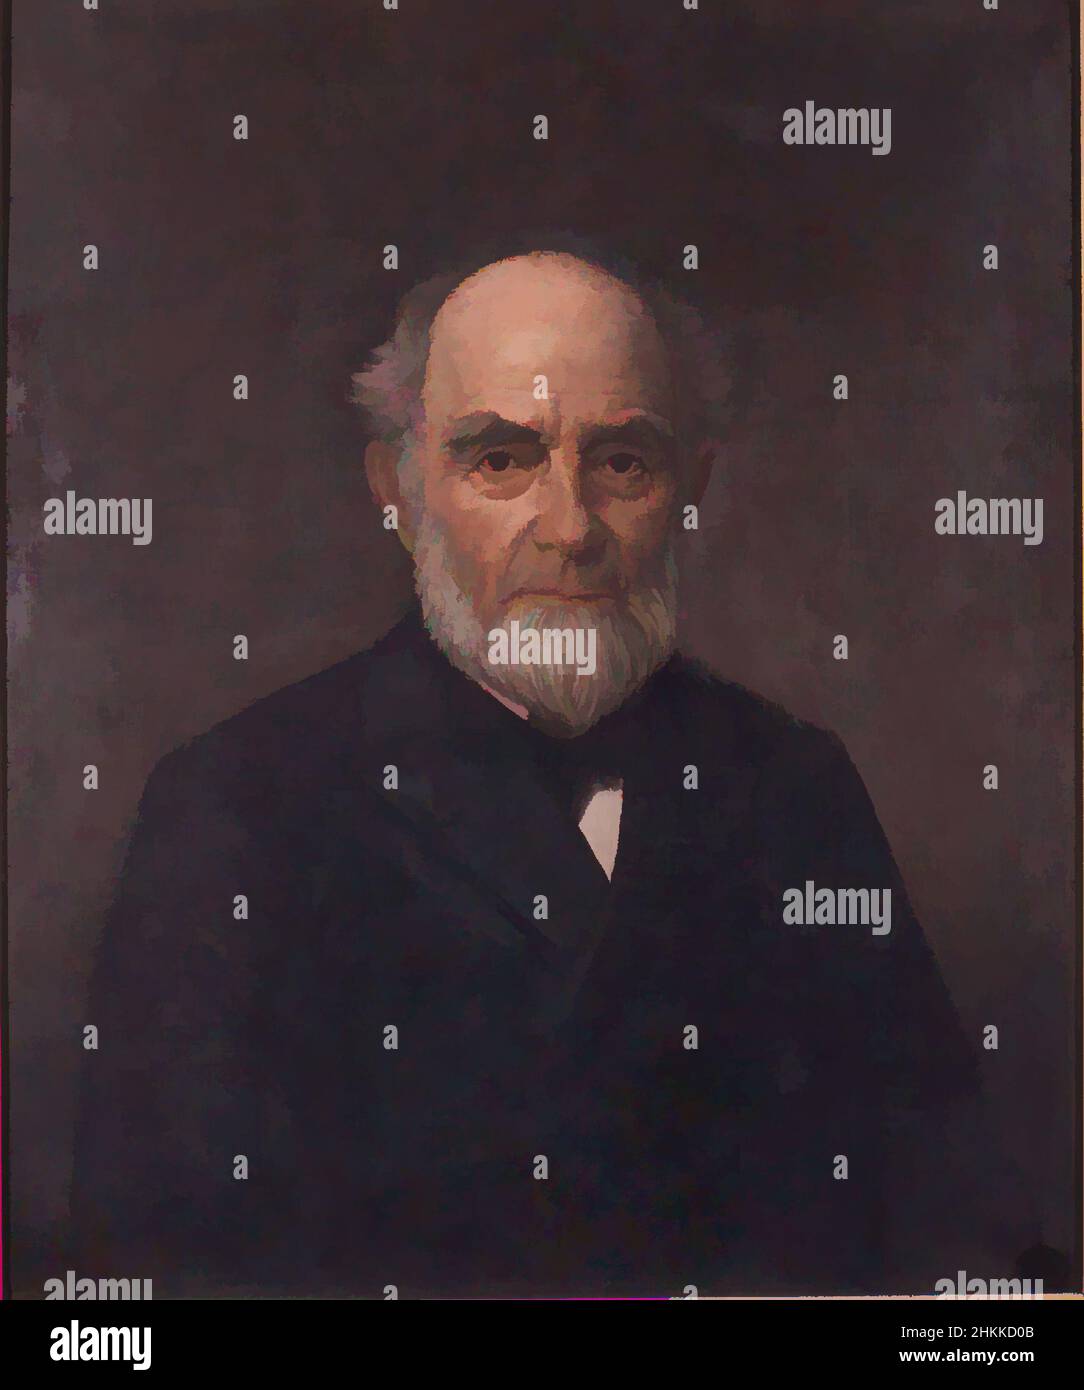 Art inspired by General Jesse C. Smith, Thomas Martin Jensen, American, 1831-1916, Oil on canvas, 1888, 30 1/16 x 25 1/16 in., 76.3 x 63.6 cm, male figure, portrait, Classic works modernized by Artotop with a splash of modernity. Shapes, color and value, eye-catching visual impact on art. Emotions through freedom of artworks in a contemporary way. A timeless message pursuing a wildly creative new direction. Artists turning to the digital medium and creating the Artotop NFT Stock Photo